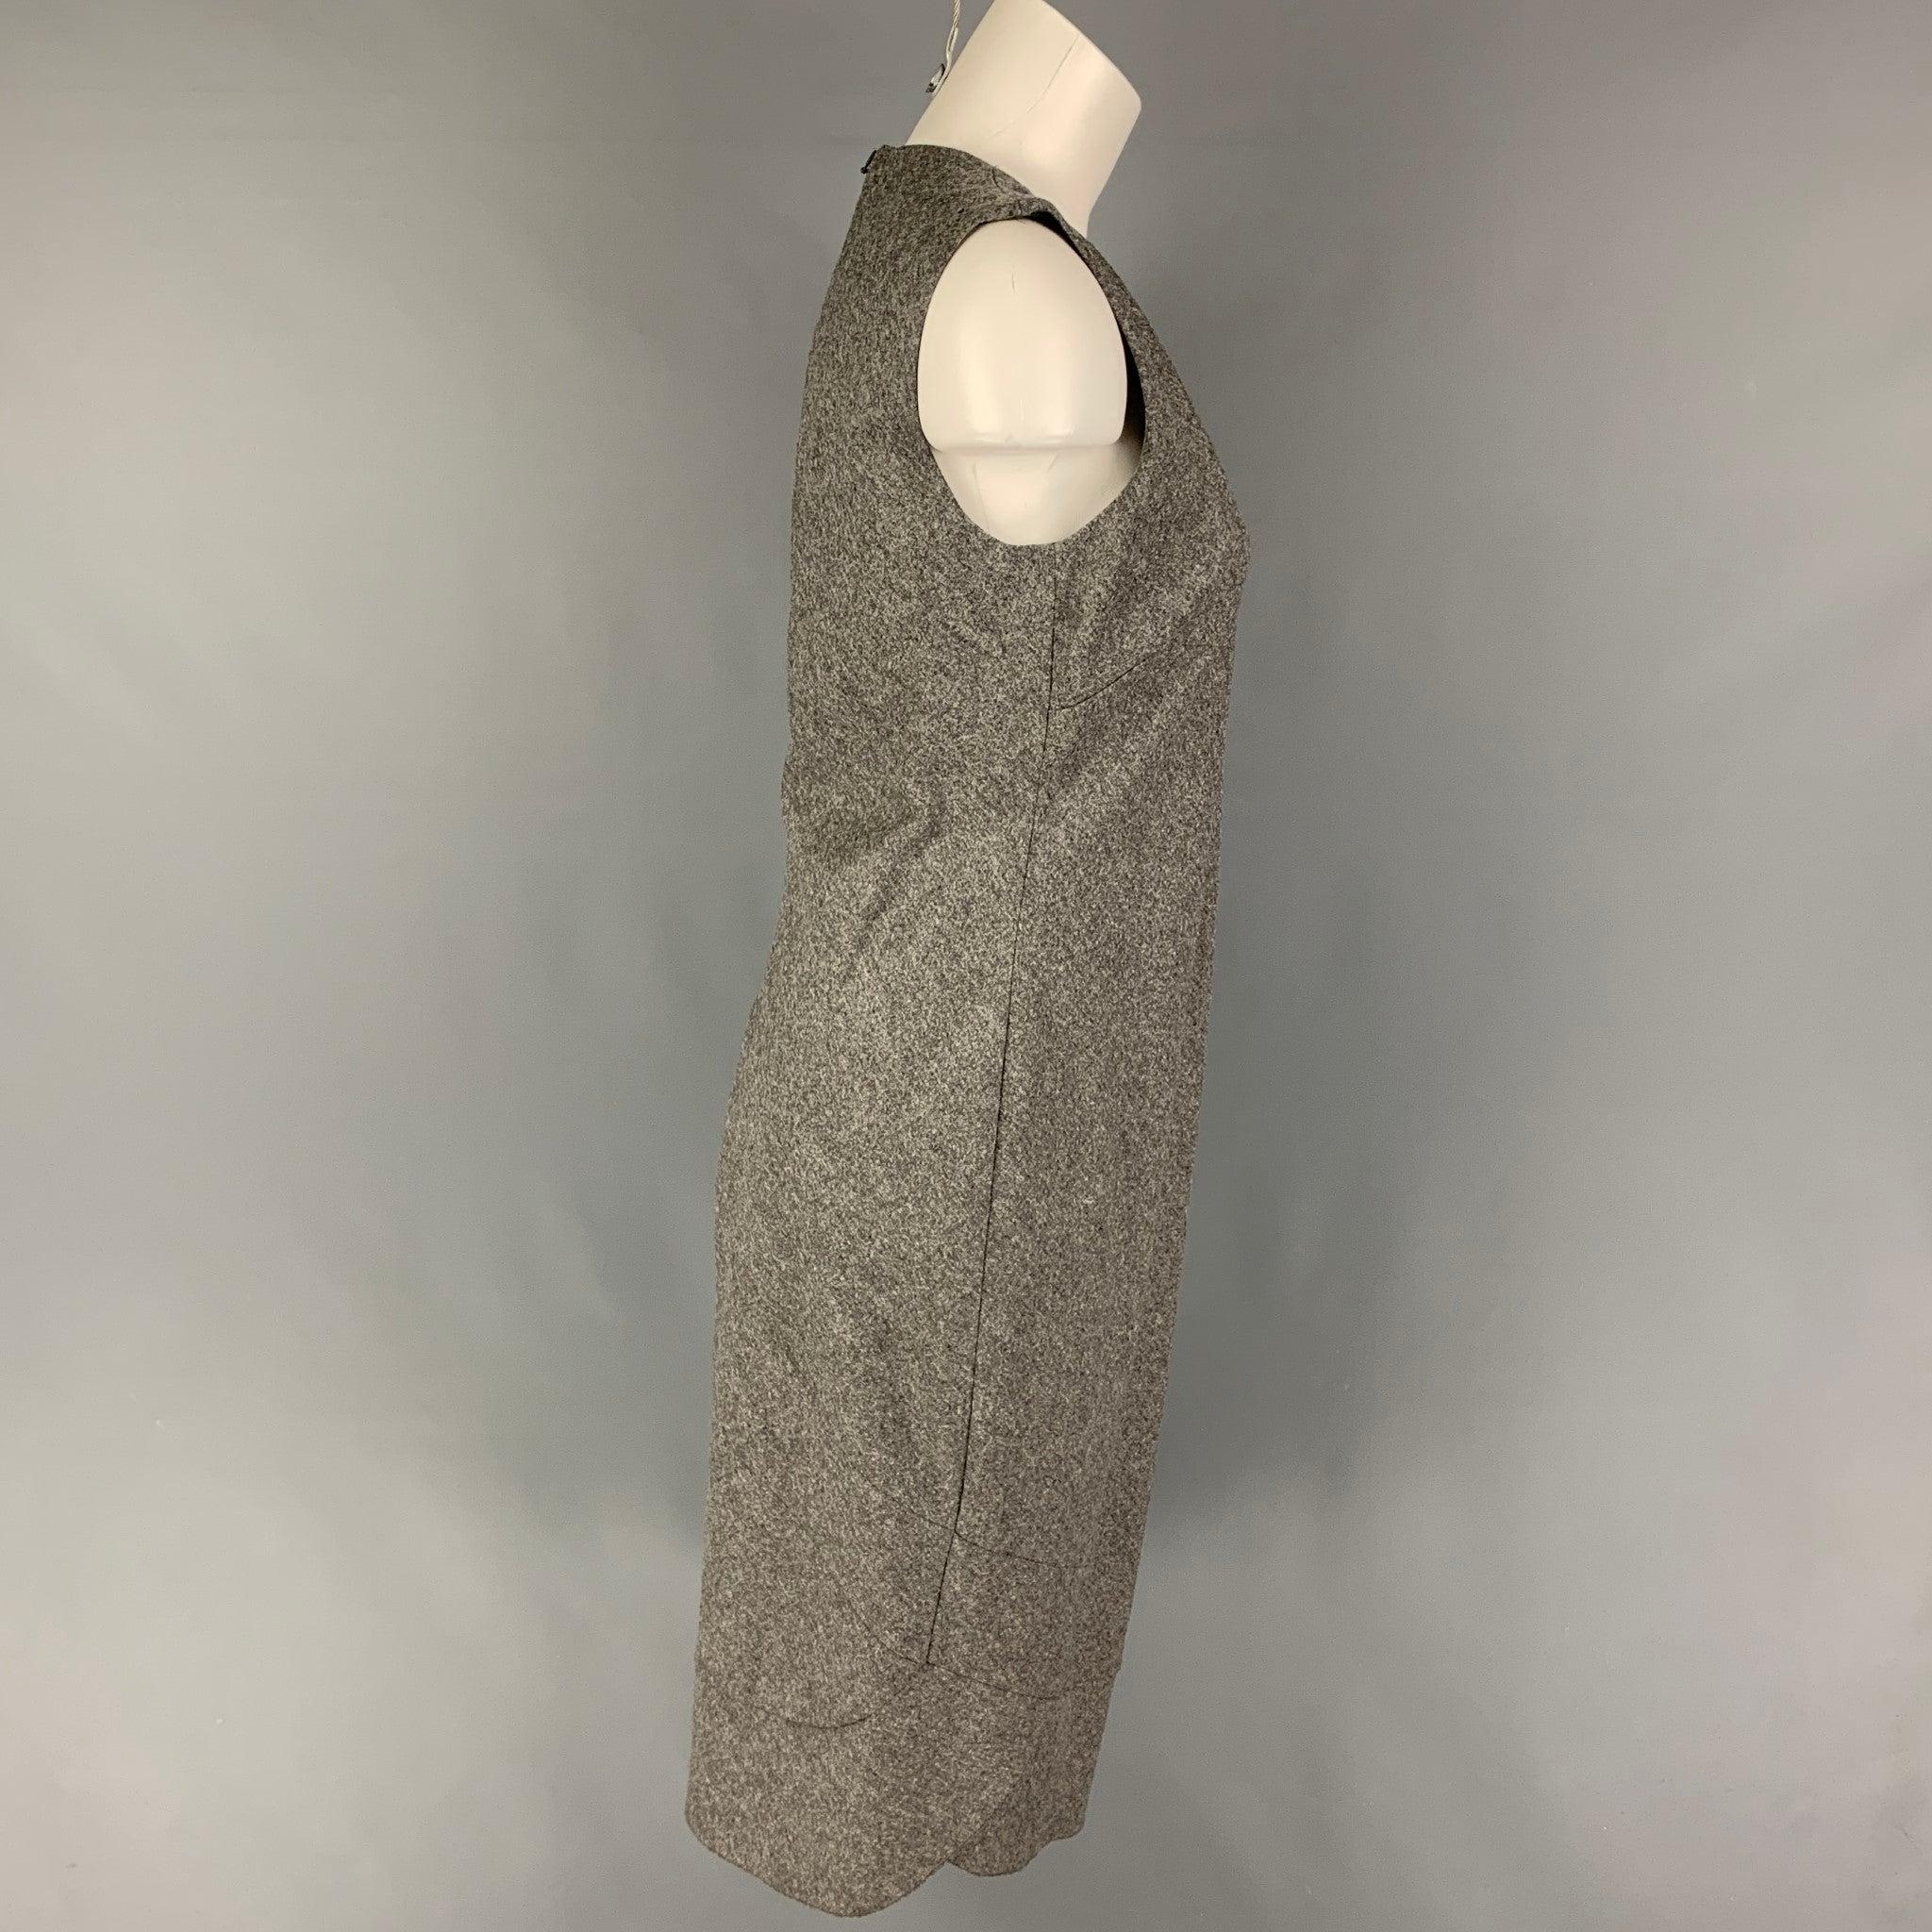 RICHARD TYLER dress comes in a grey virgin wool / cashmere featuring a v-neck, sleeveless, and a back zip up closure.
Very Good
Pre-Owned Condition. 

Marked:   44 

Measurements: 
 
Shoulder: 14.5 inches  Bust: 34 inches  Waist: 30 inches  Hip: 36